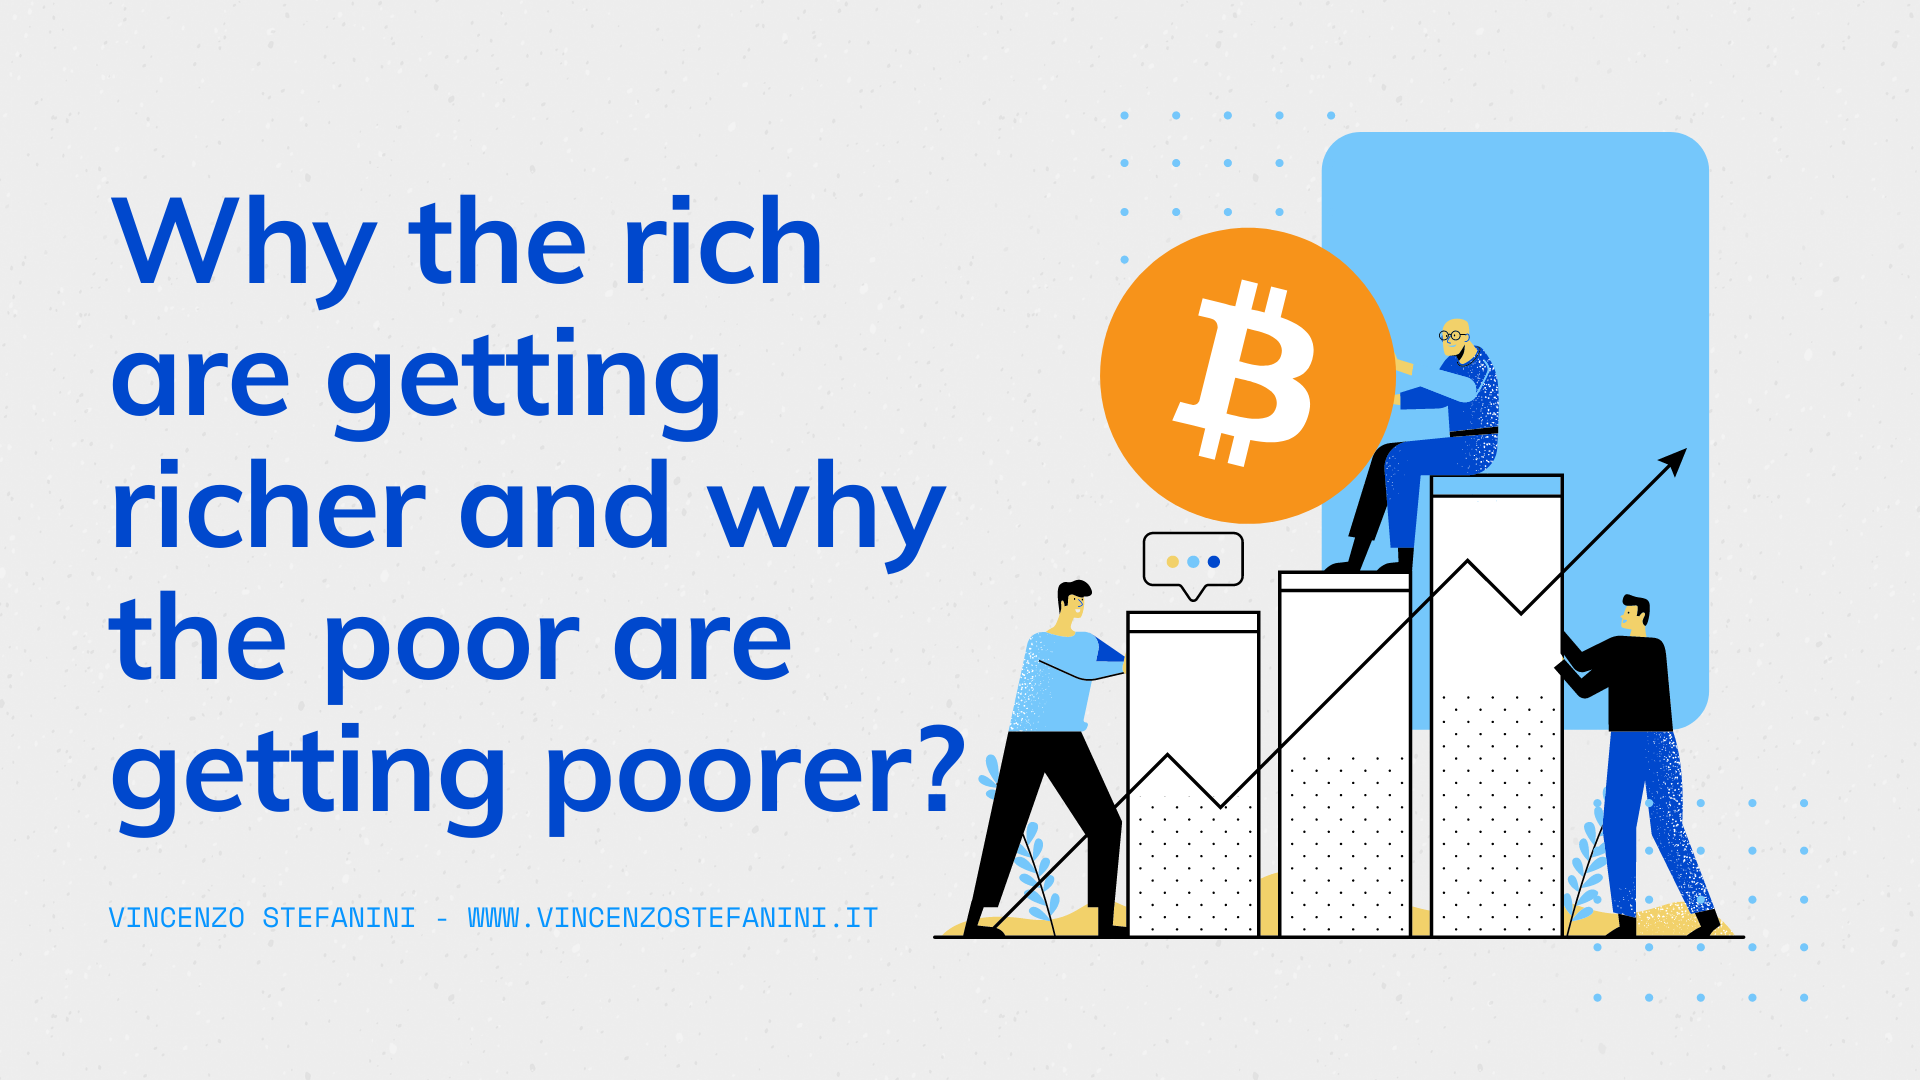 Why the rich are getting richer and why the poor are getting poorer